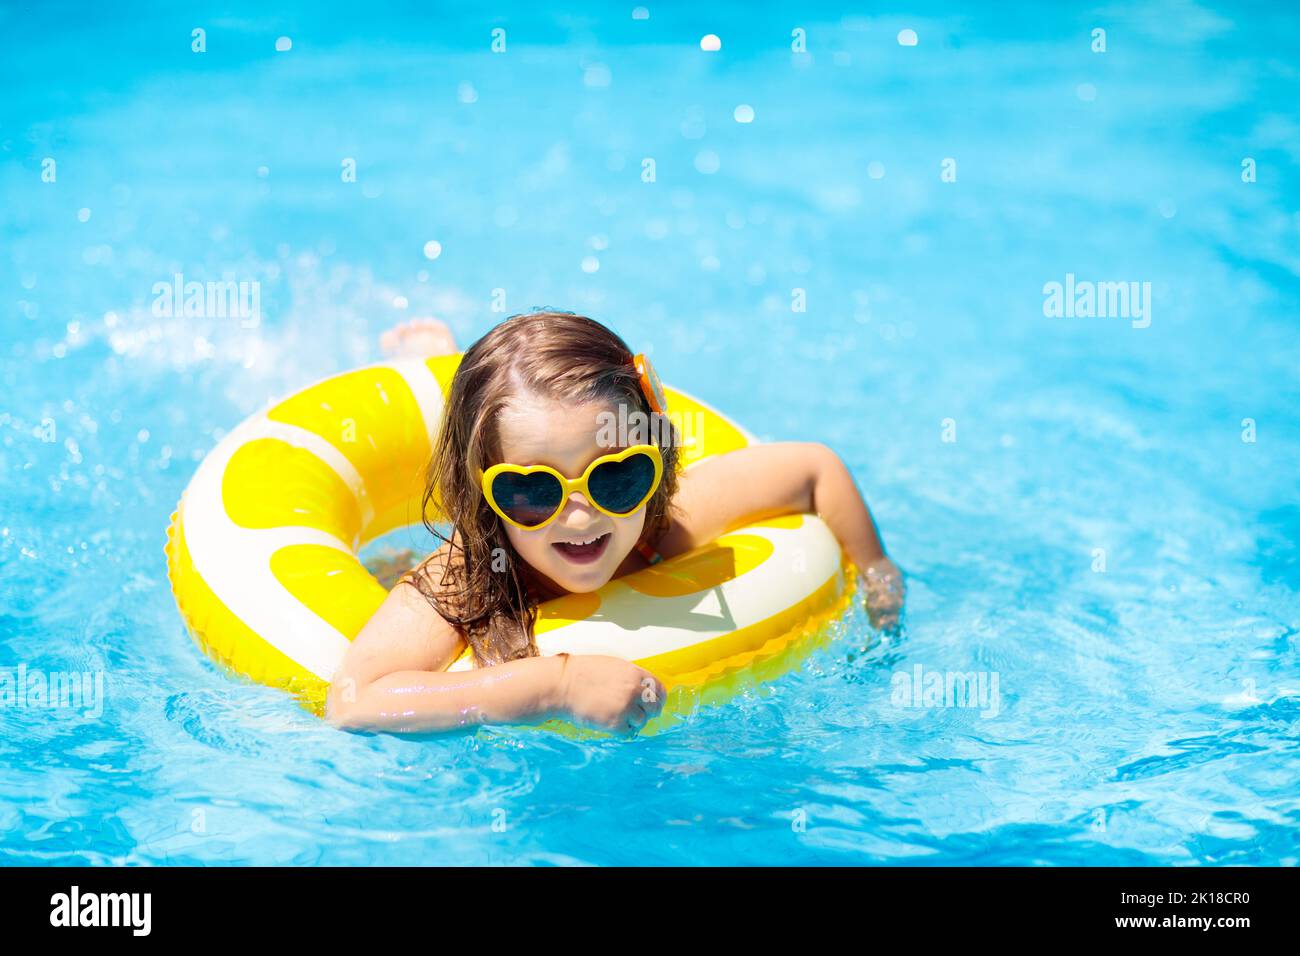 Child in swimming pool on inflatable yellow lemon ring. Little girl learning to swim with orange float. Water toy for baby and toddler. Healthy outdoo Stock Photo